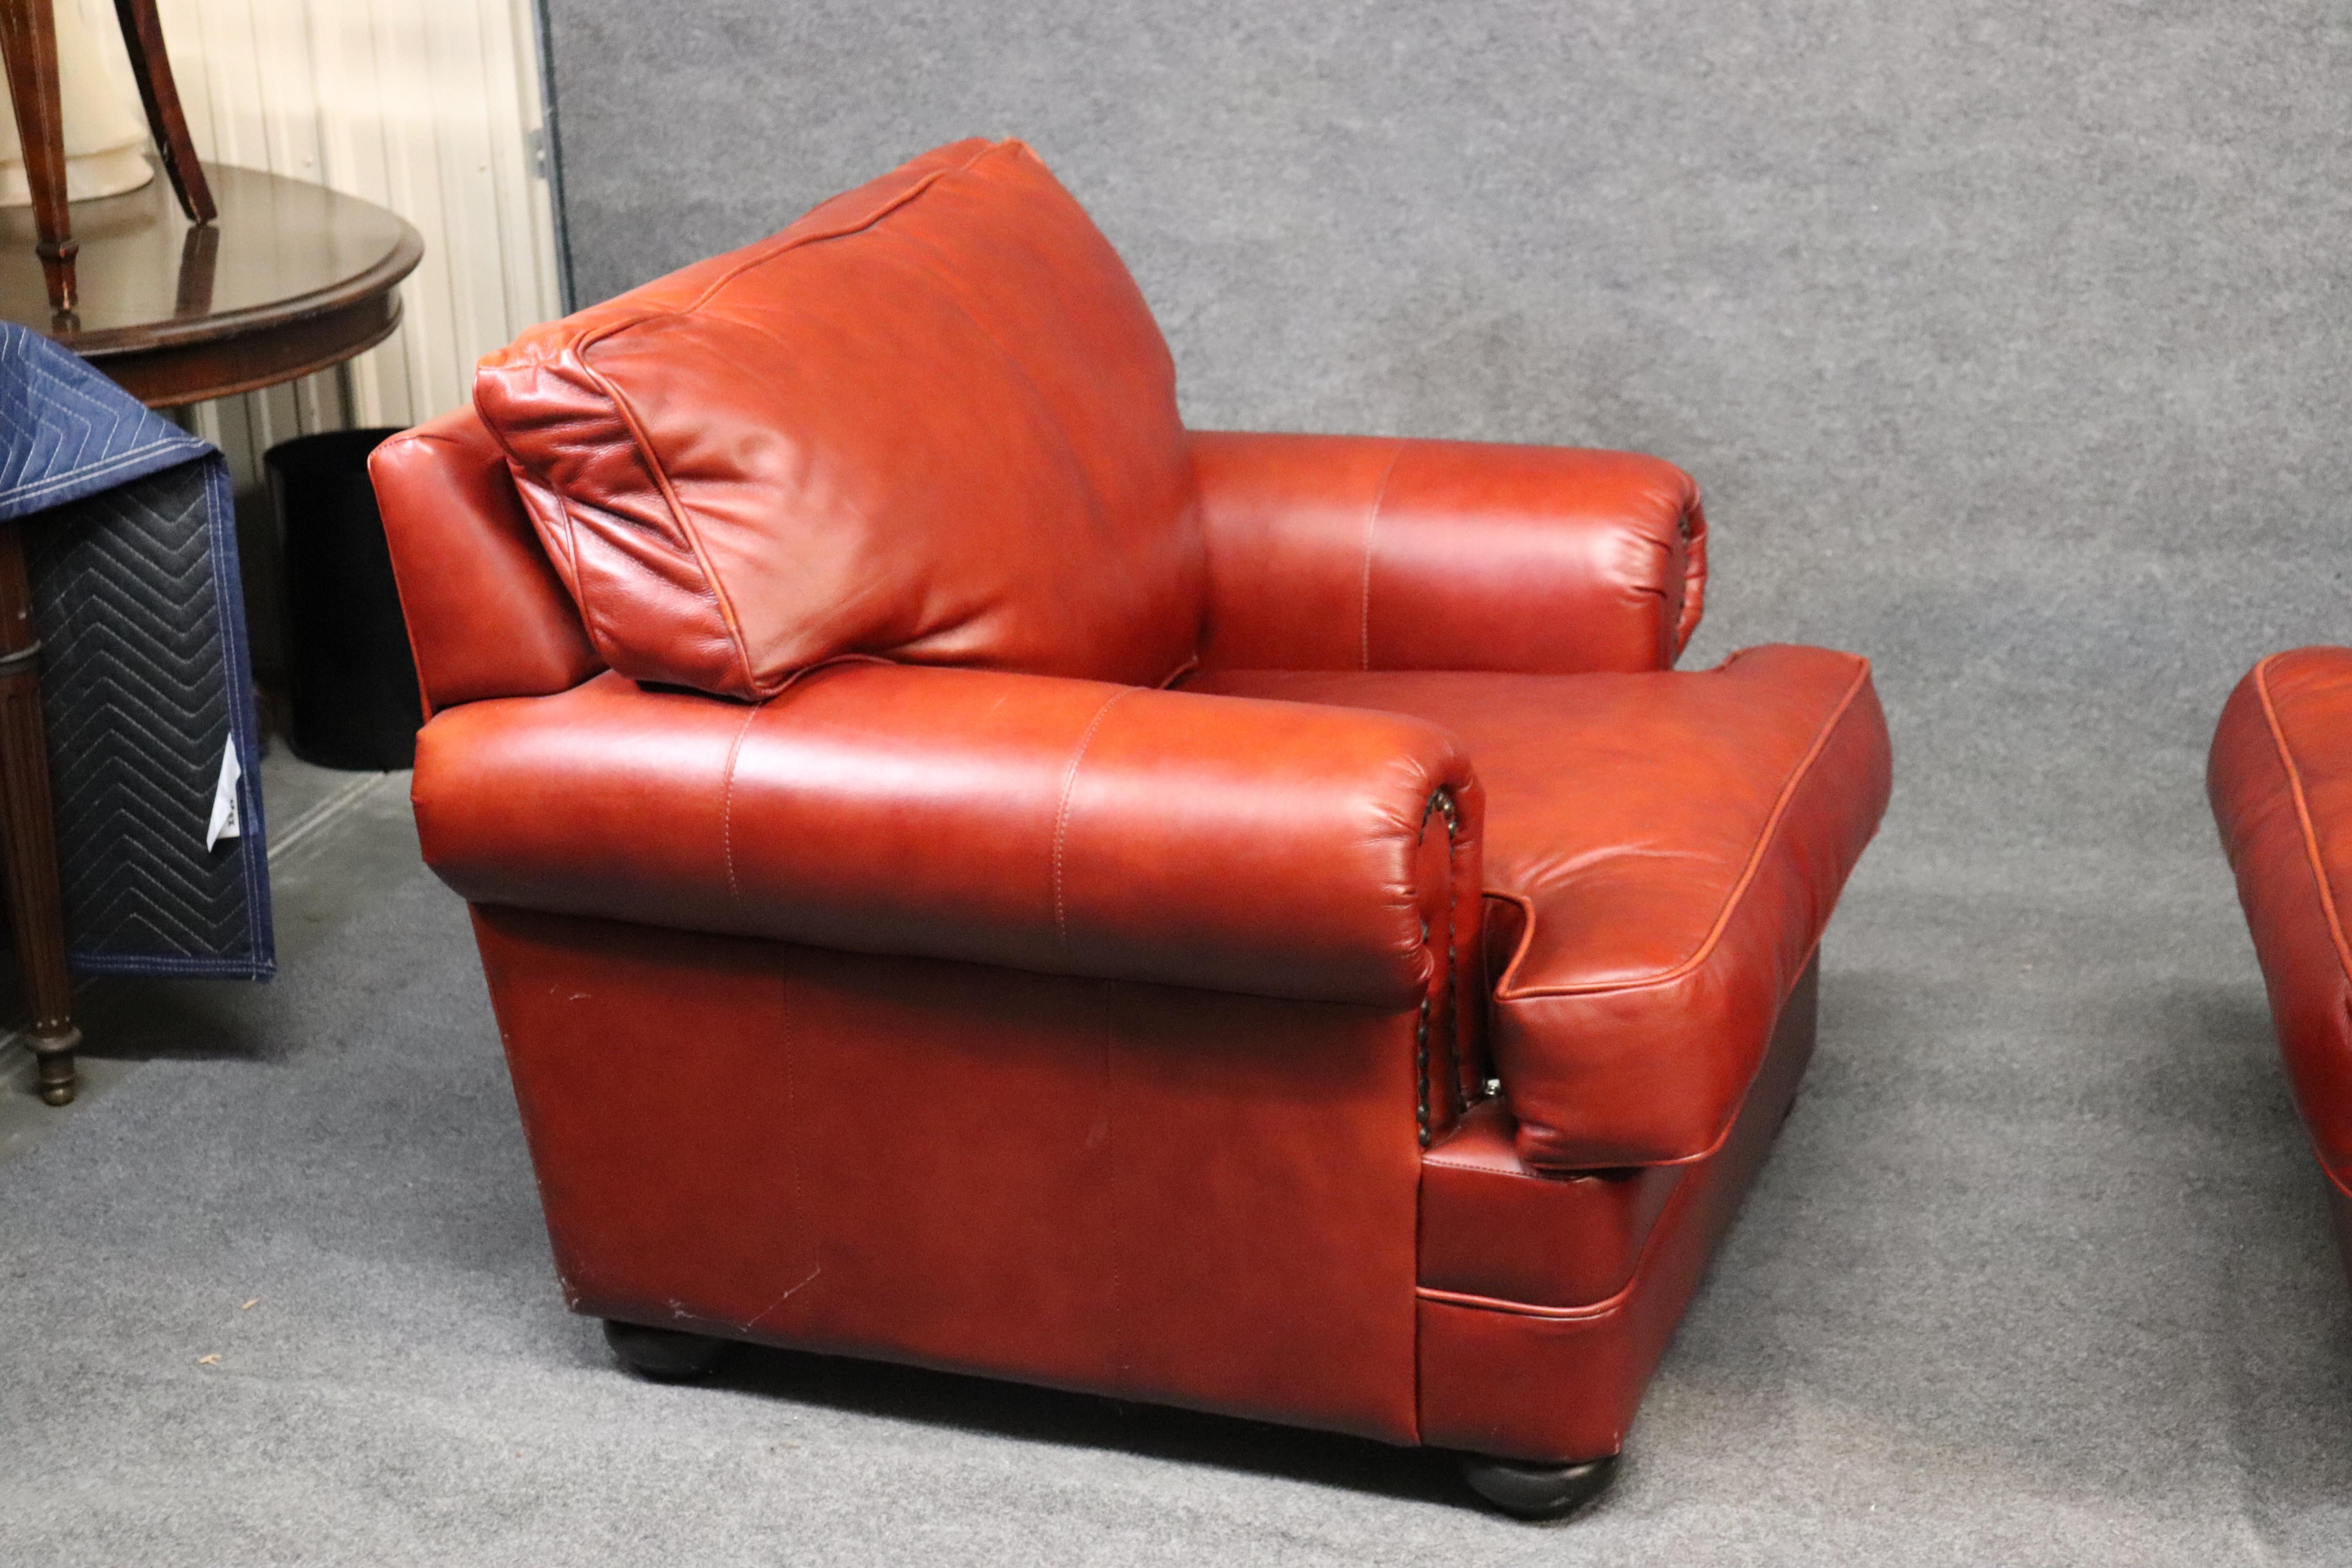 American Orange-Red Pair of Custom Made All Genuine Leather Club Chairs